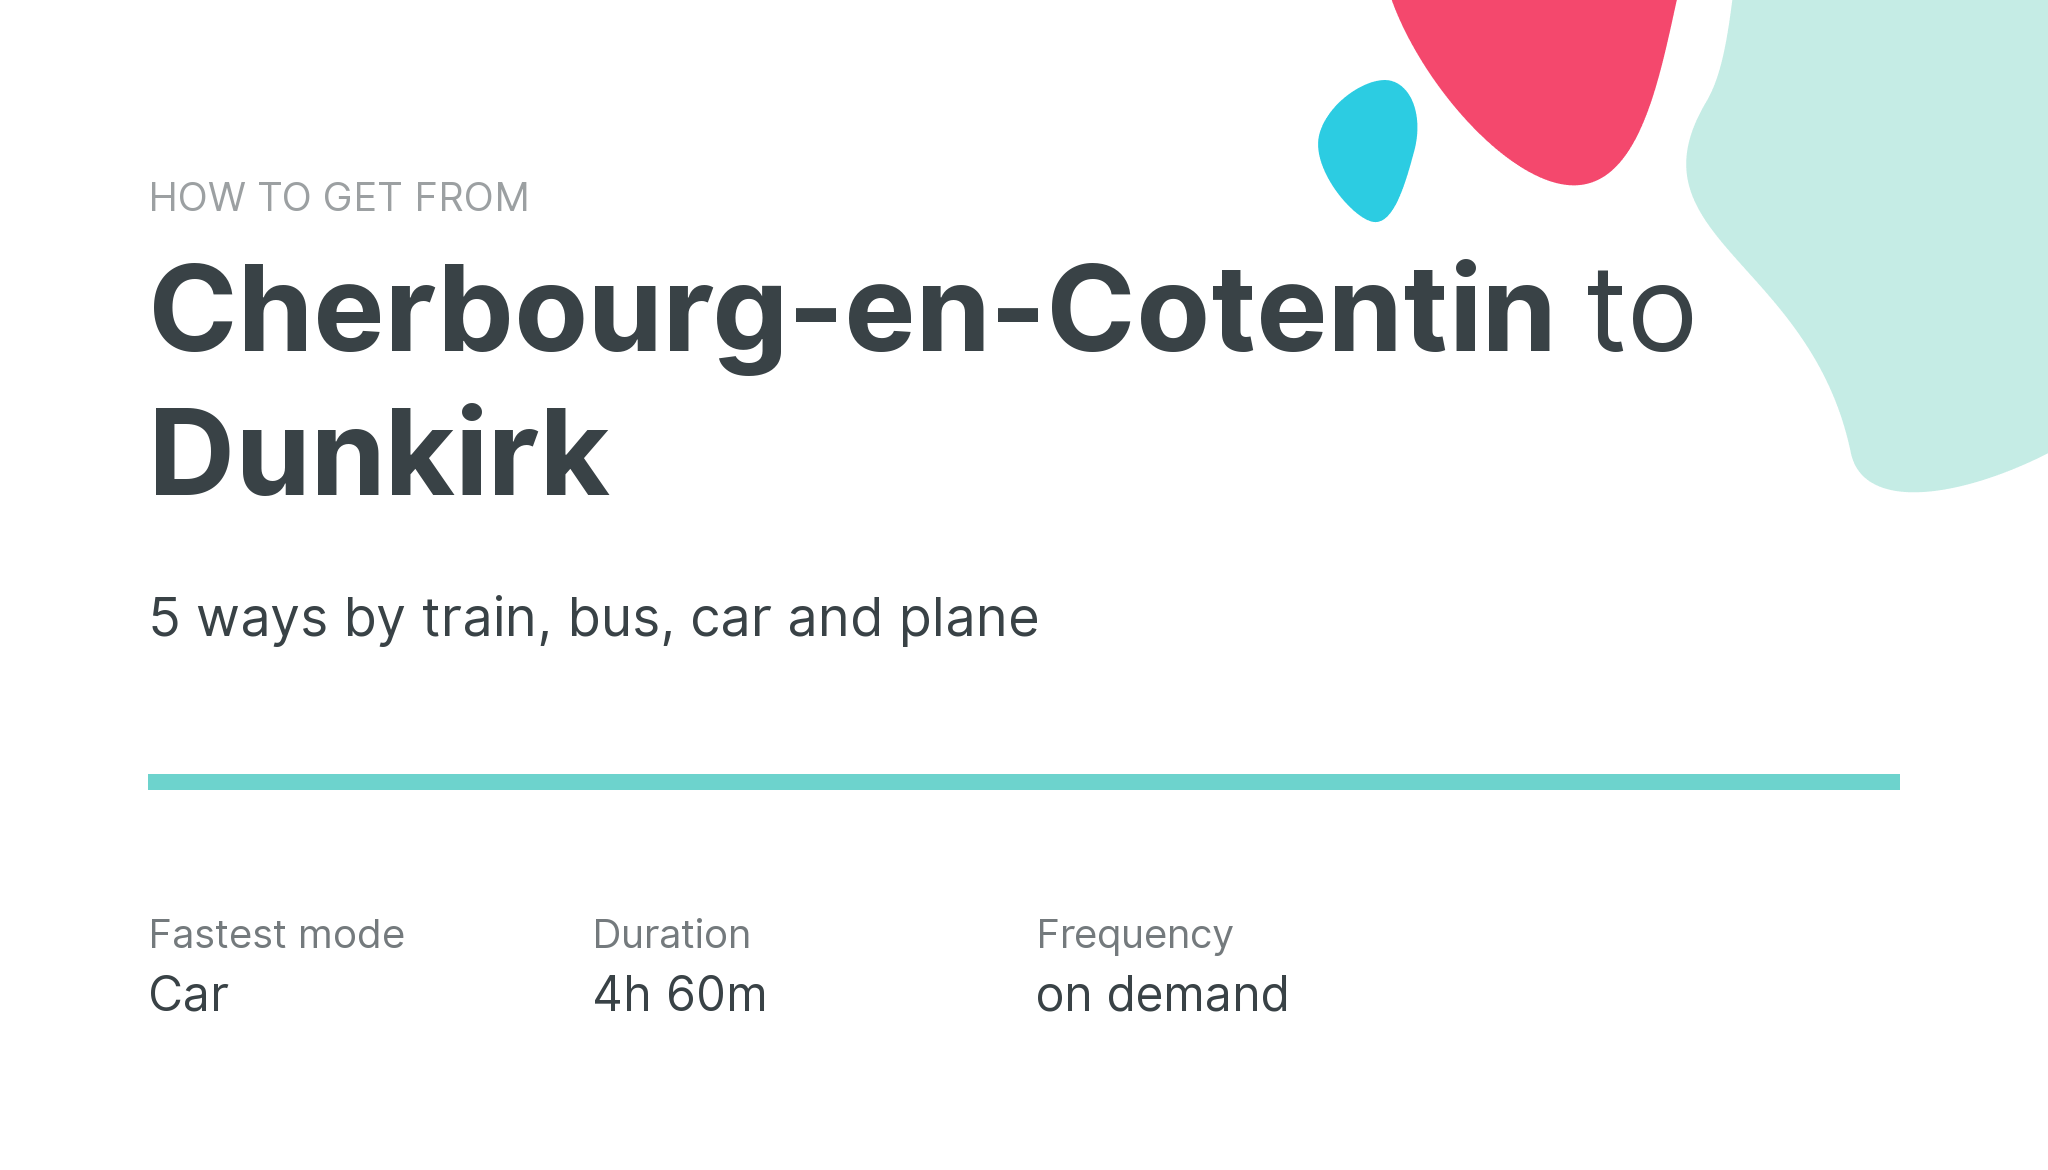 How do I get from Cherbourg-en-Cotentin to Dunkirk